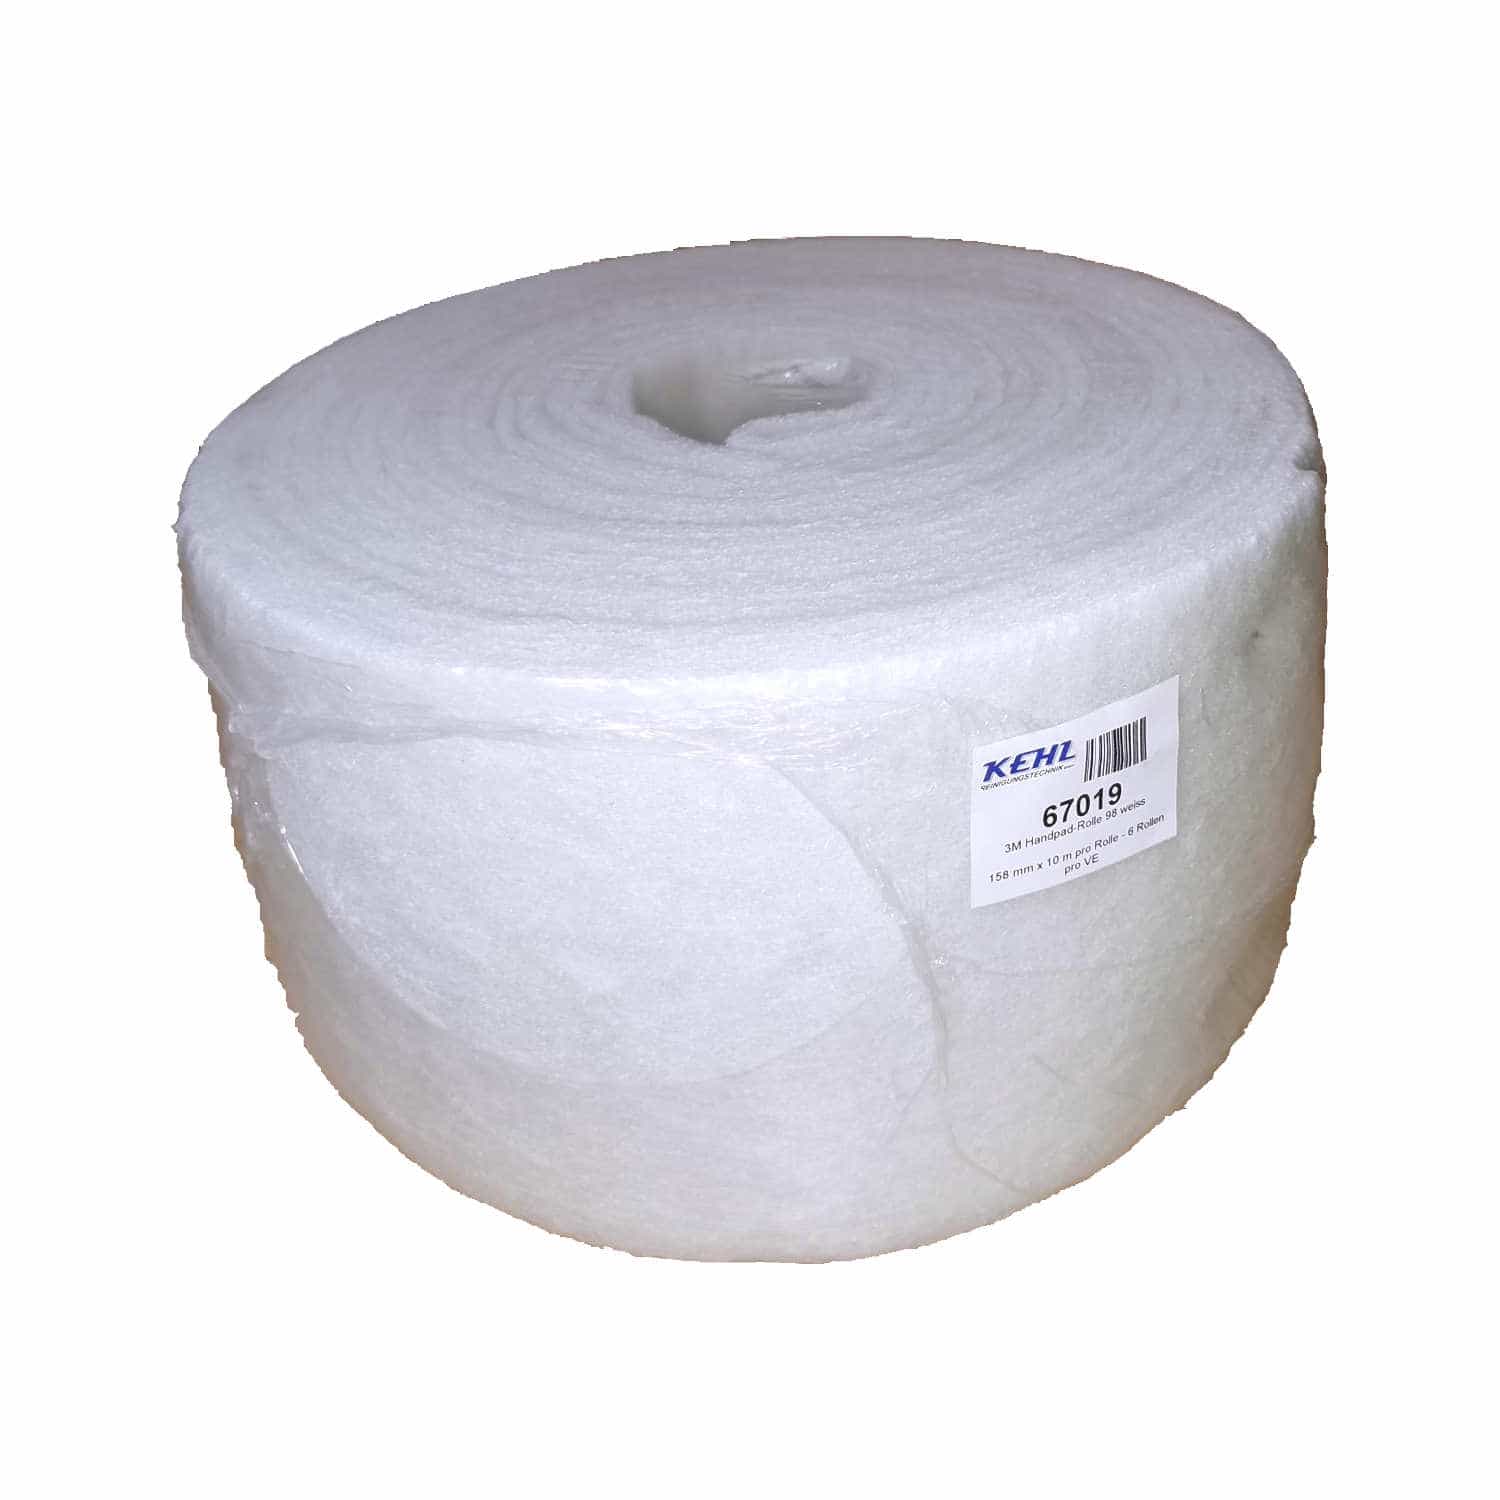 3M Handpad-Rolle 98 weiss (158 mm x 10 m pro Rolle)